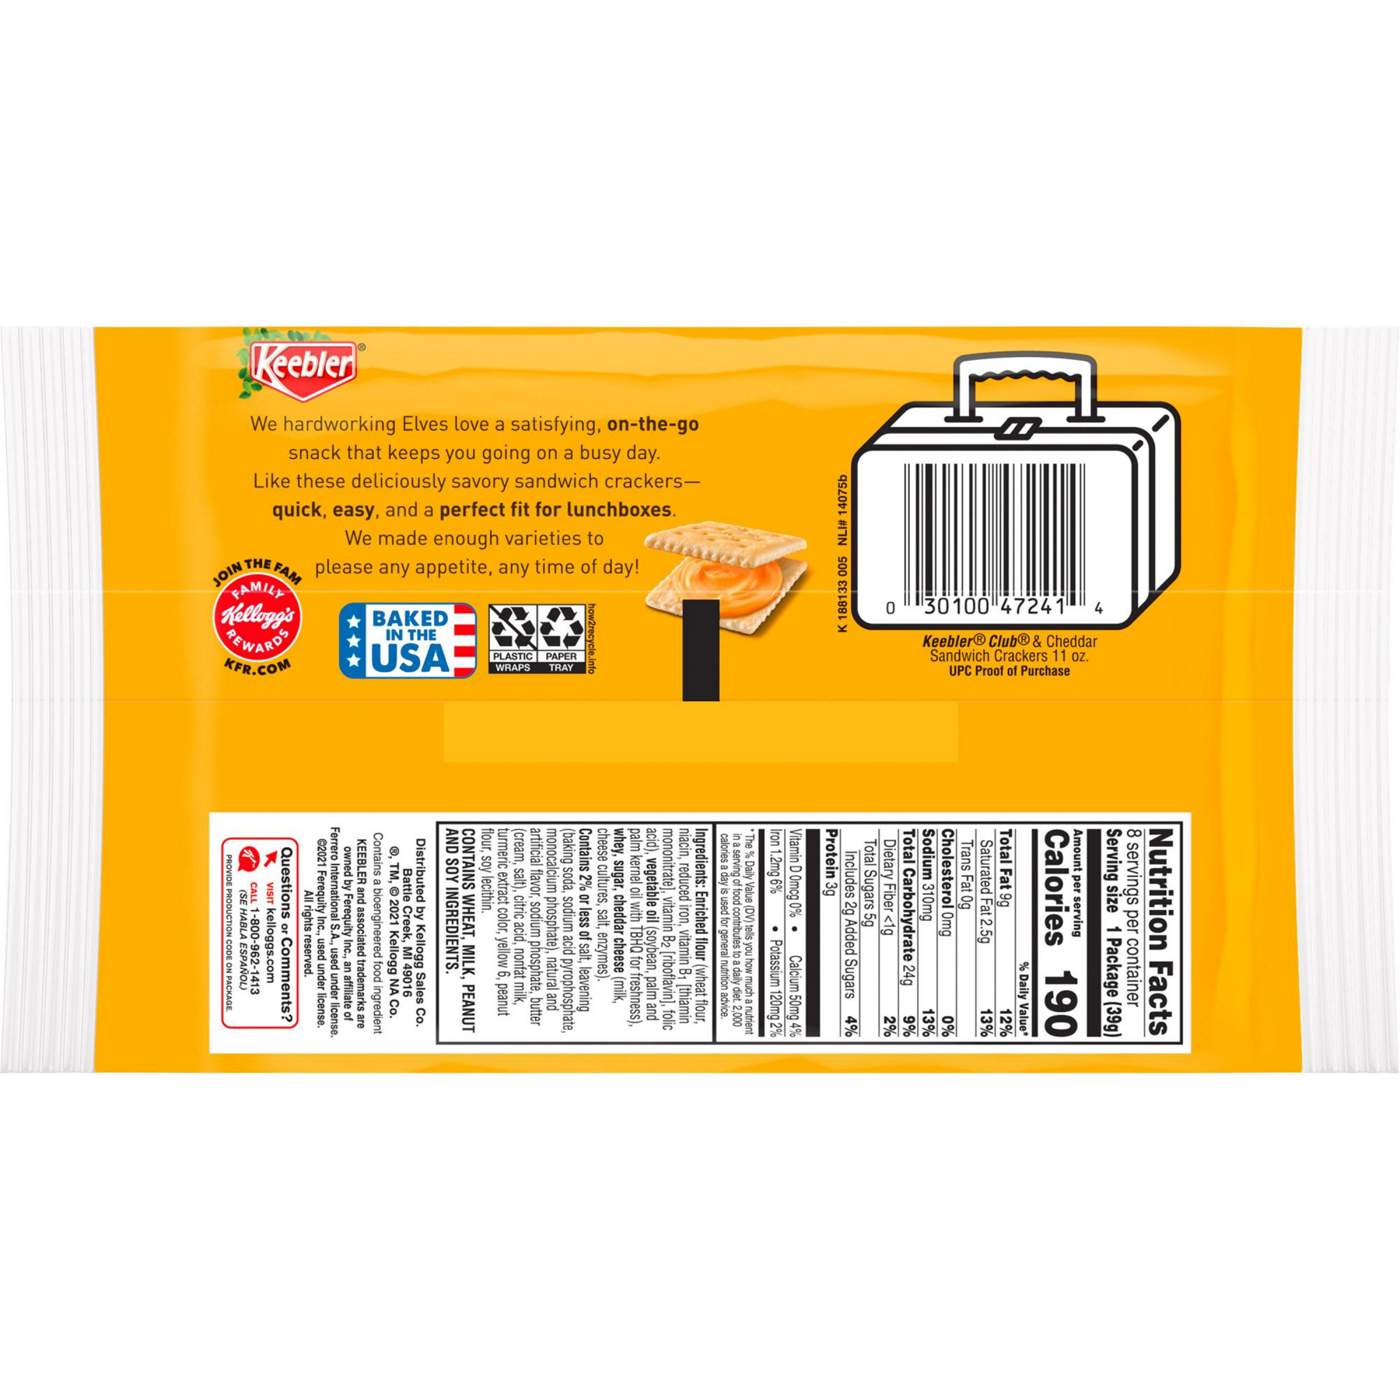 Keebler Club and Cheddar Sandwich Crackers; image 2 of 2